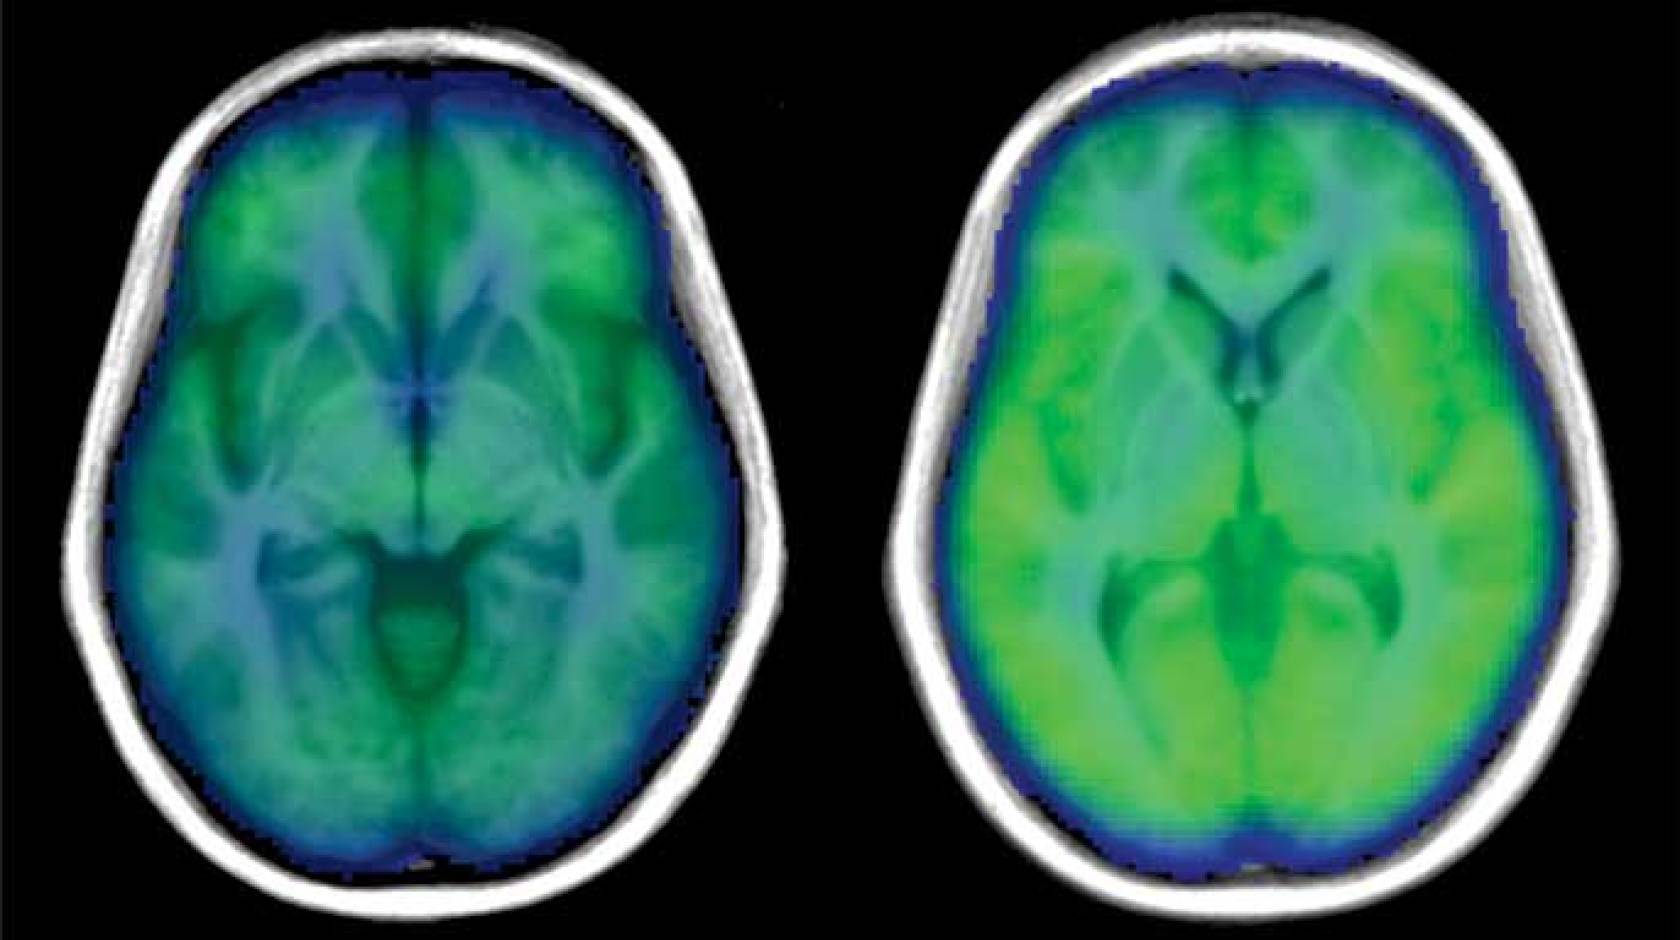 Brain scans: with (left) and without obstructive sleep apnea